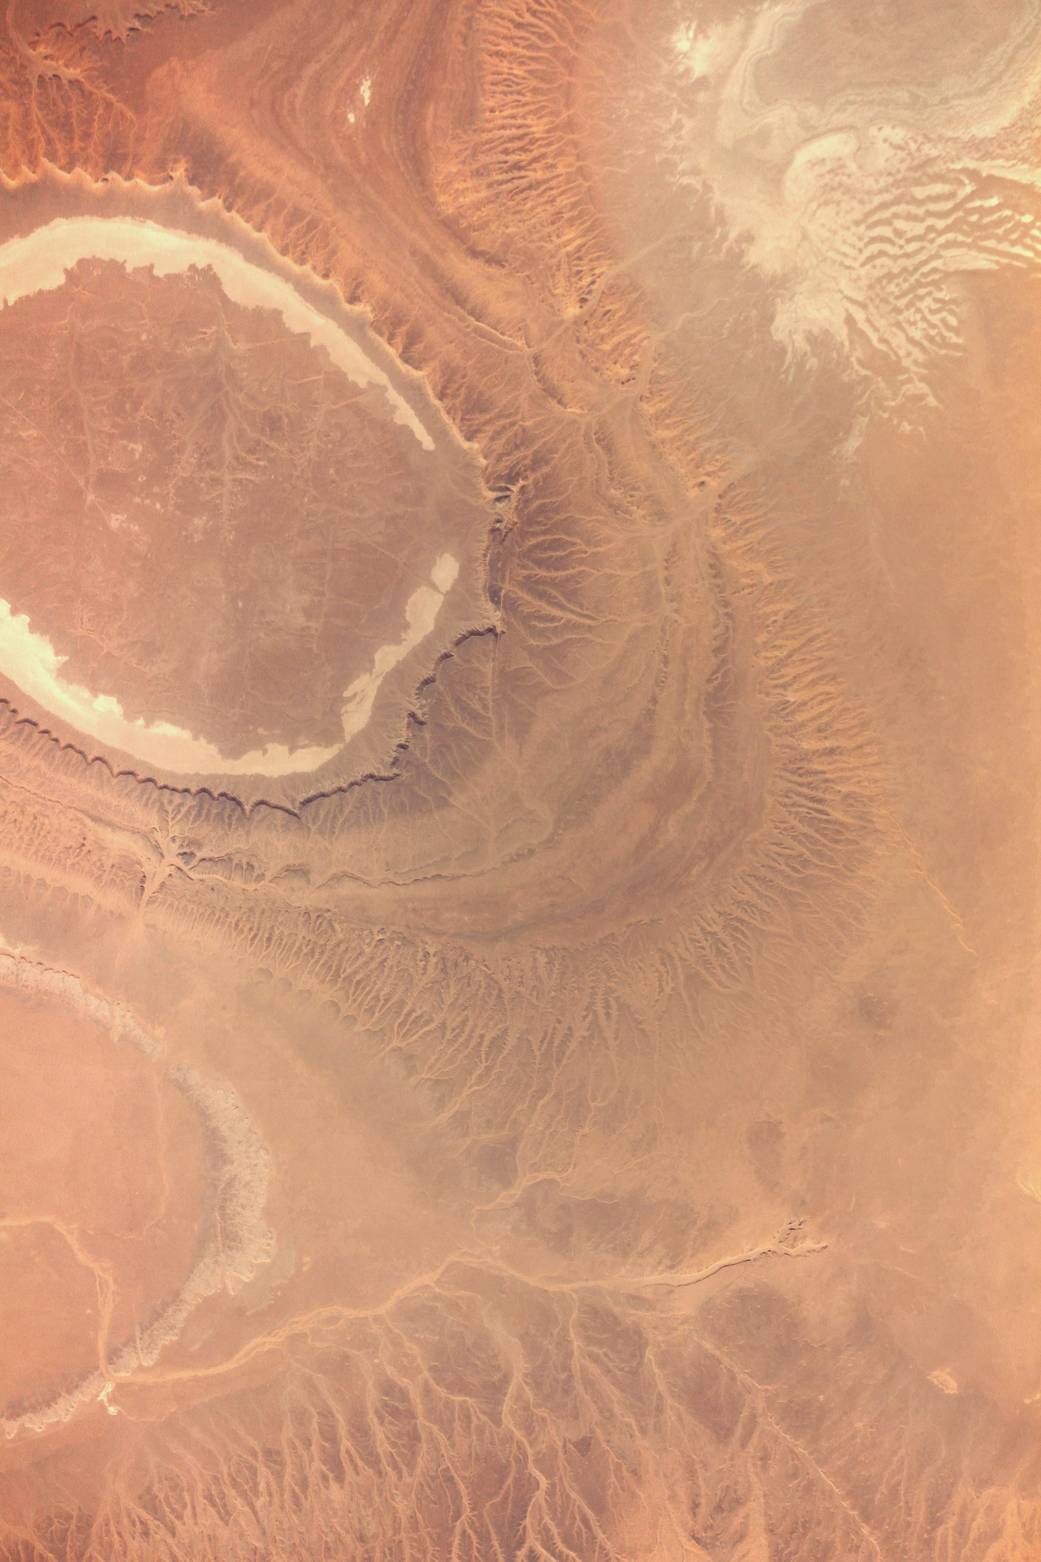 SERVIR's ISERV Camera Image of Algeria from Space Station